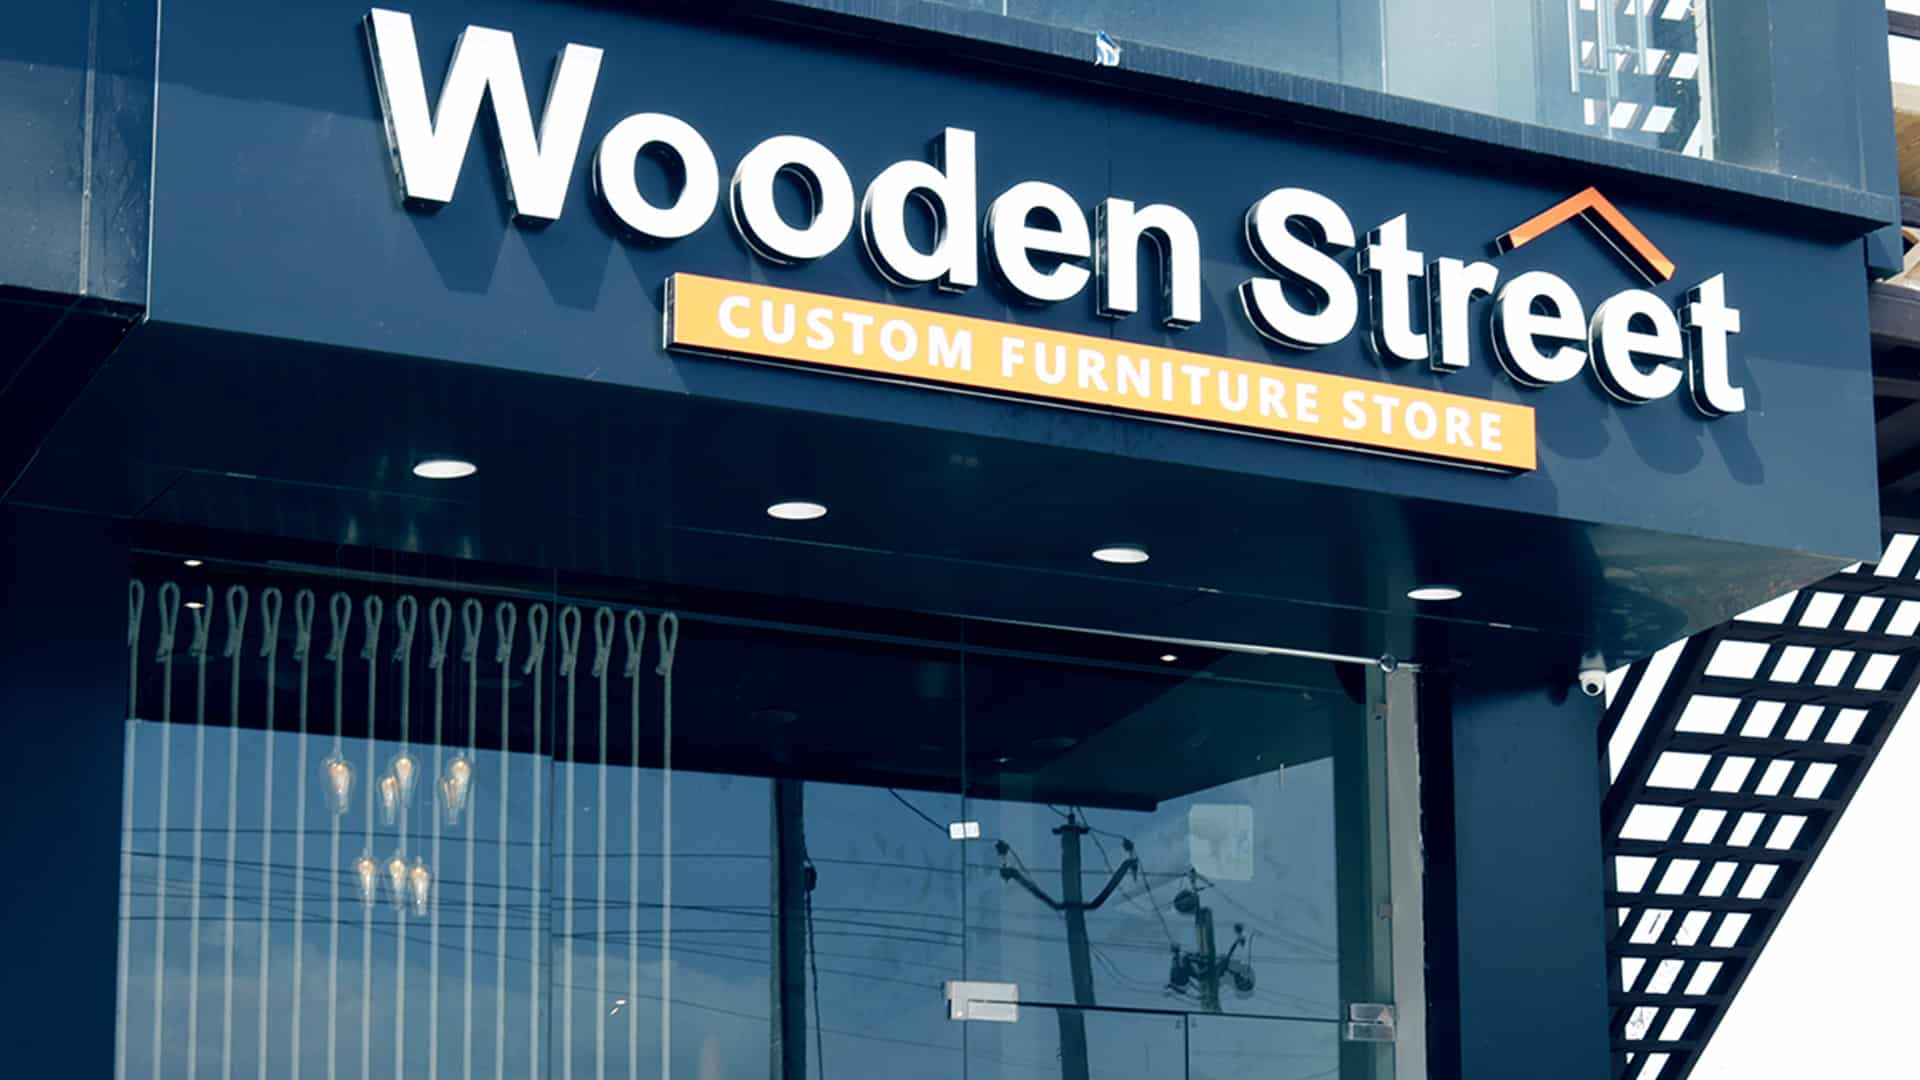 WoodenStreet to invest $5 mn on warehouse expansion; hire 300 people